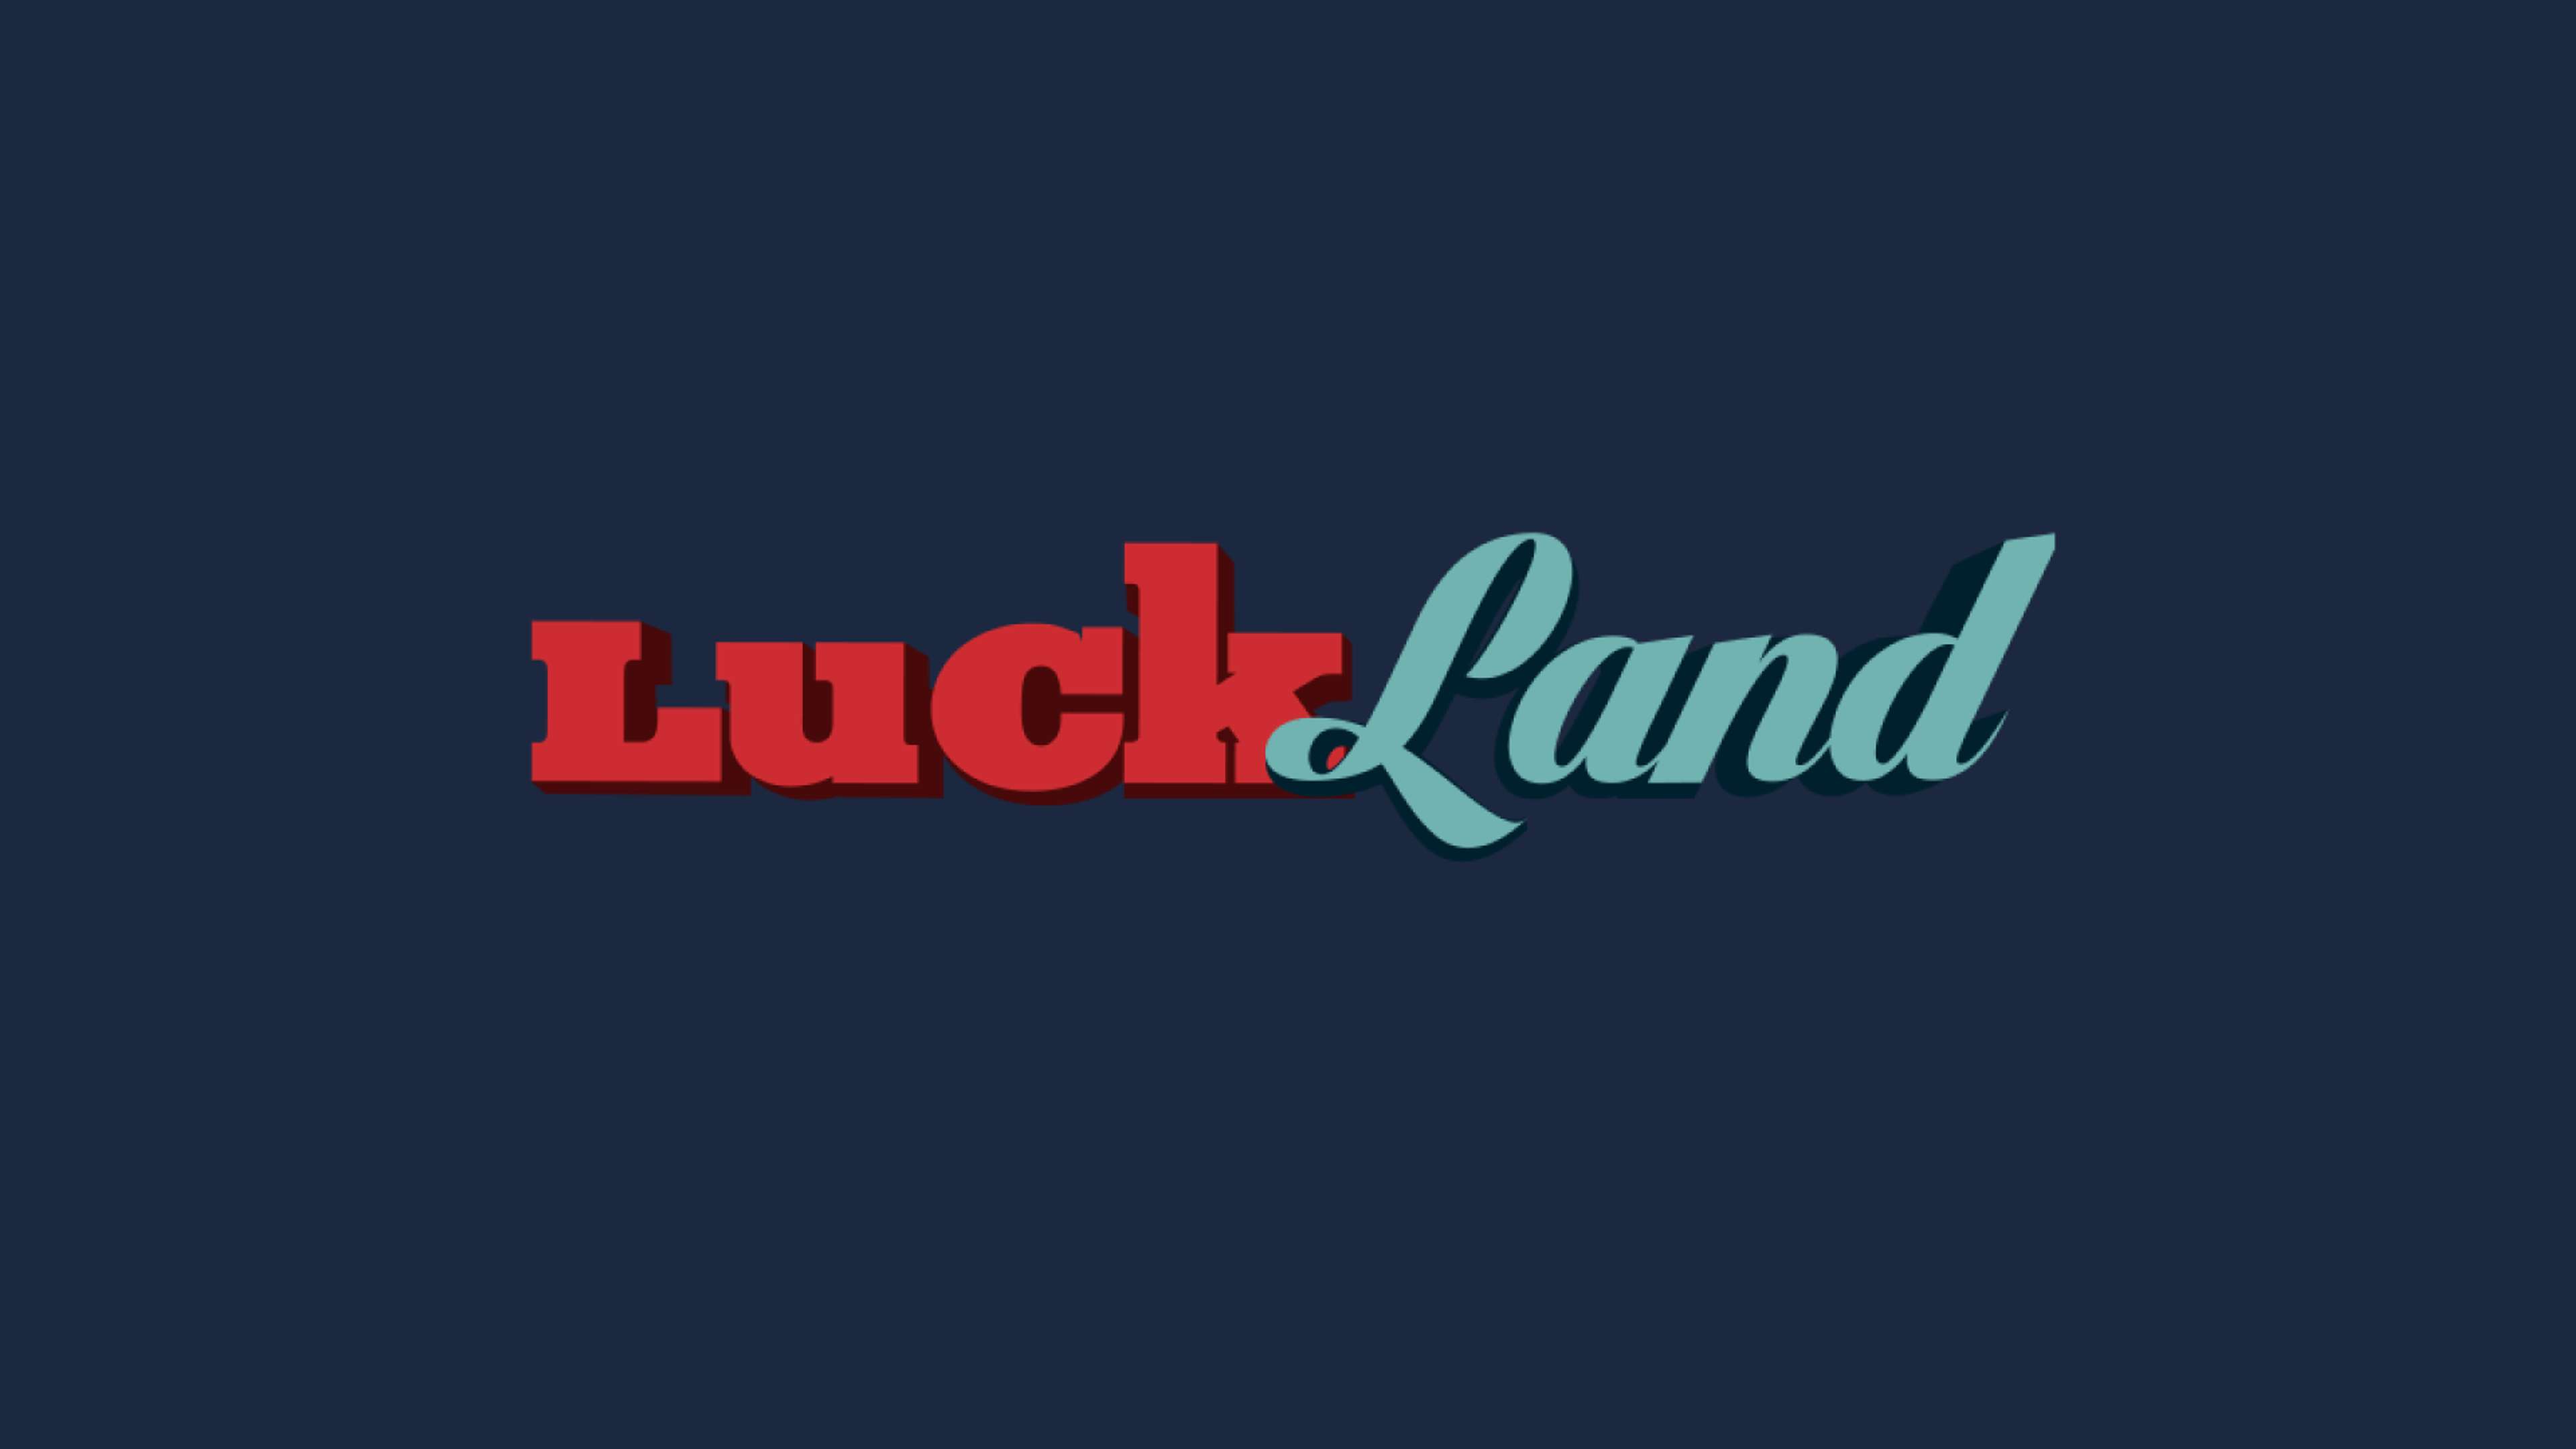 LuckLand Promo Code and Sign Up Offer